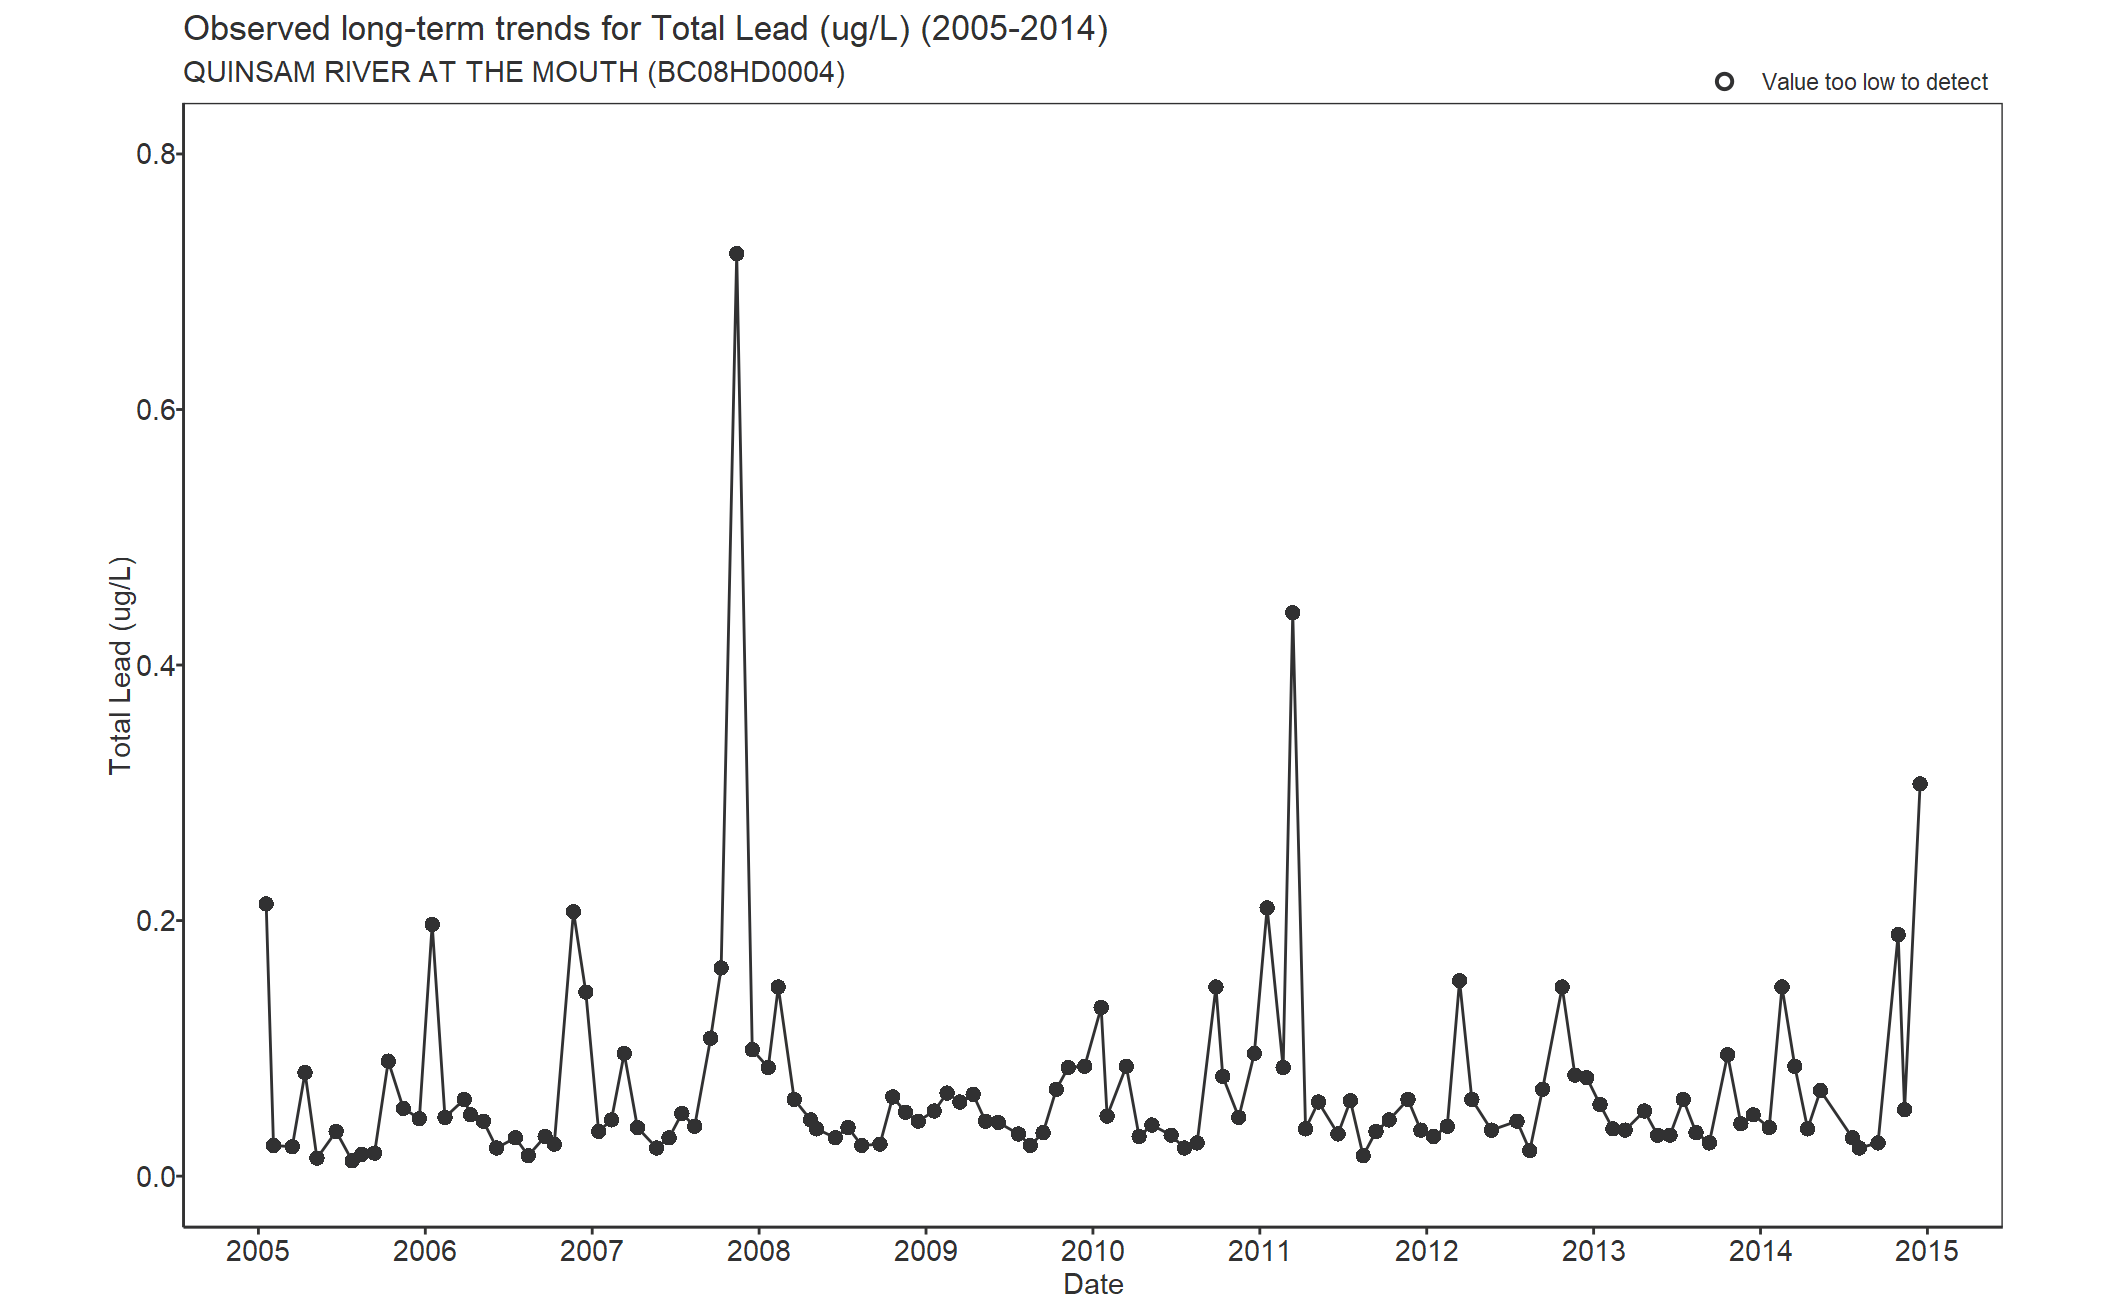 Observed long-term trends for Total Lead (2005-2014)